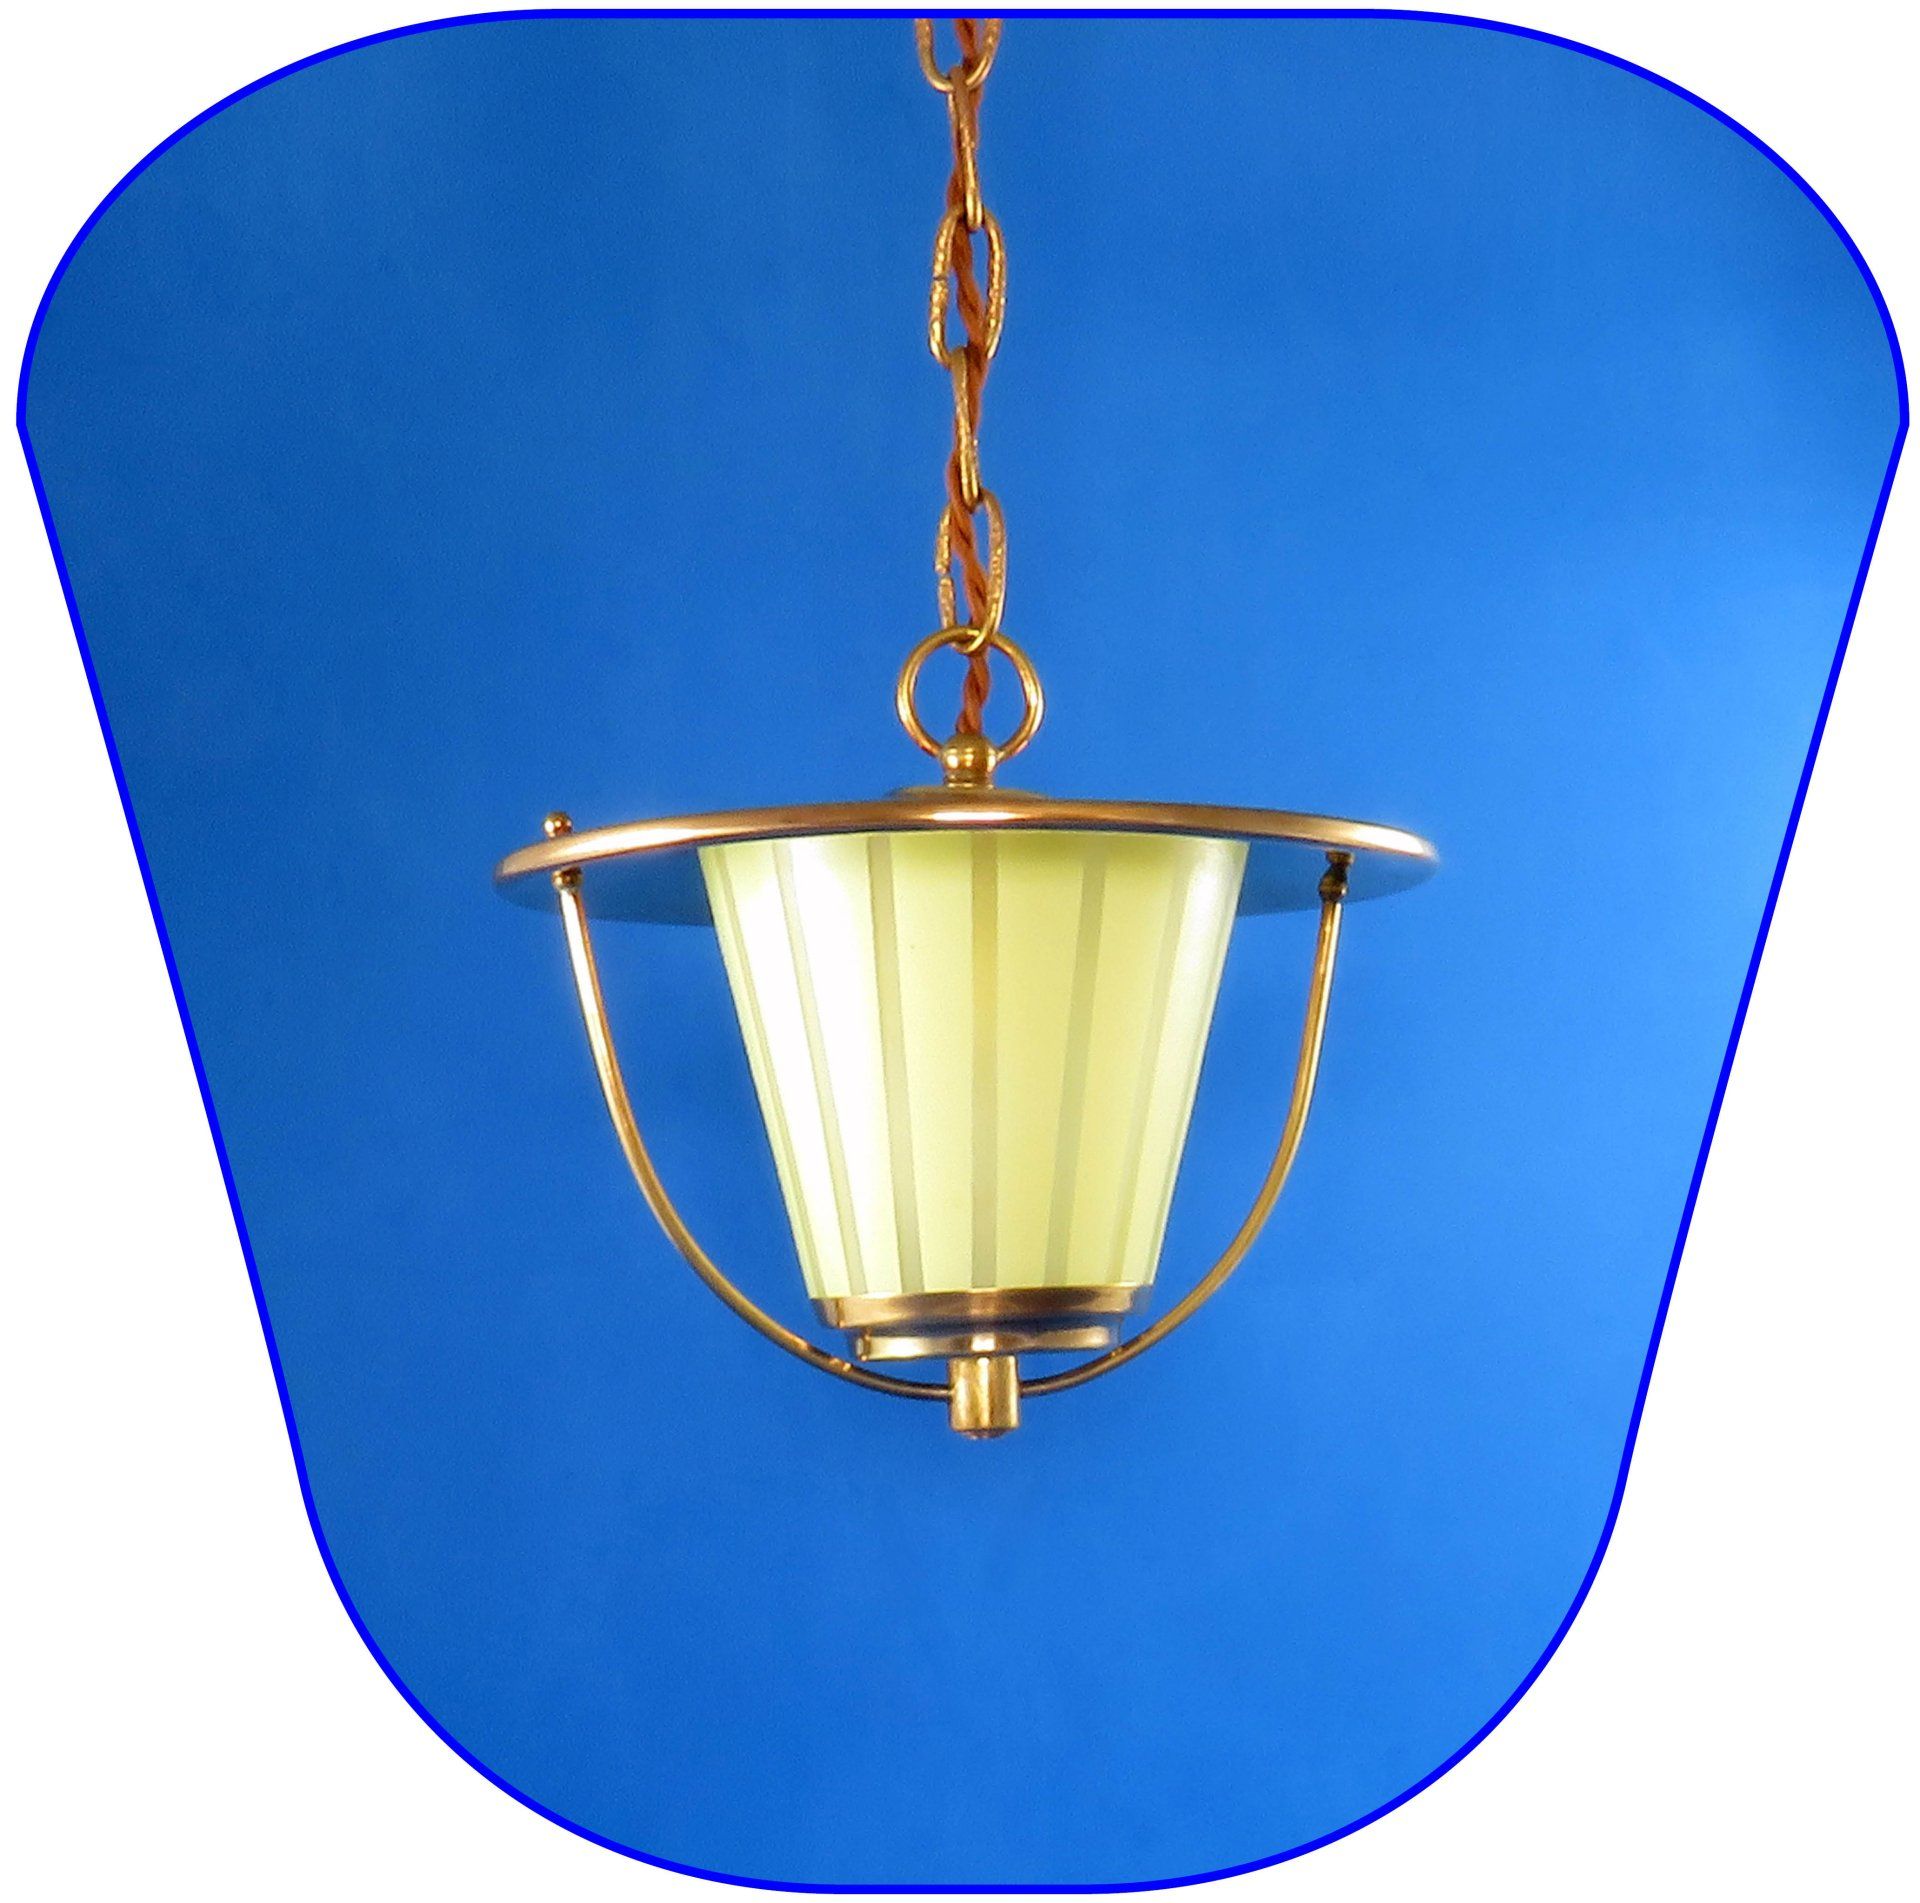 GOLDEN PENDANT LAMP WITH STRIPES